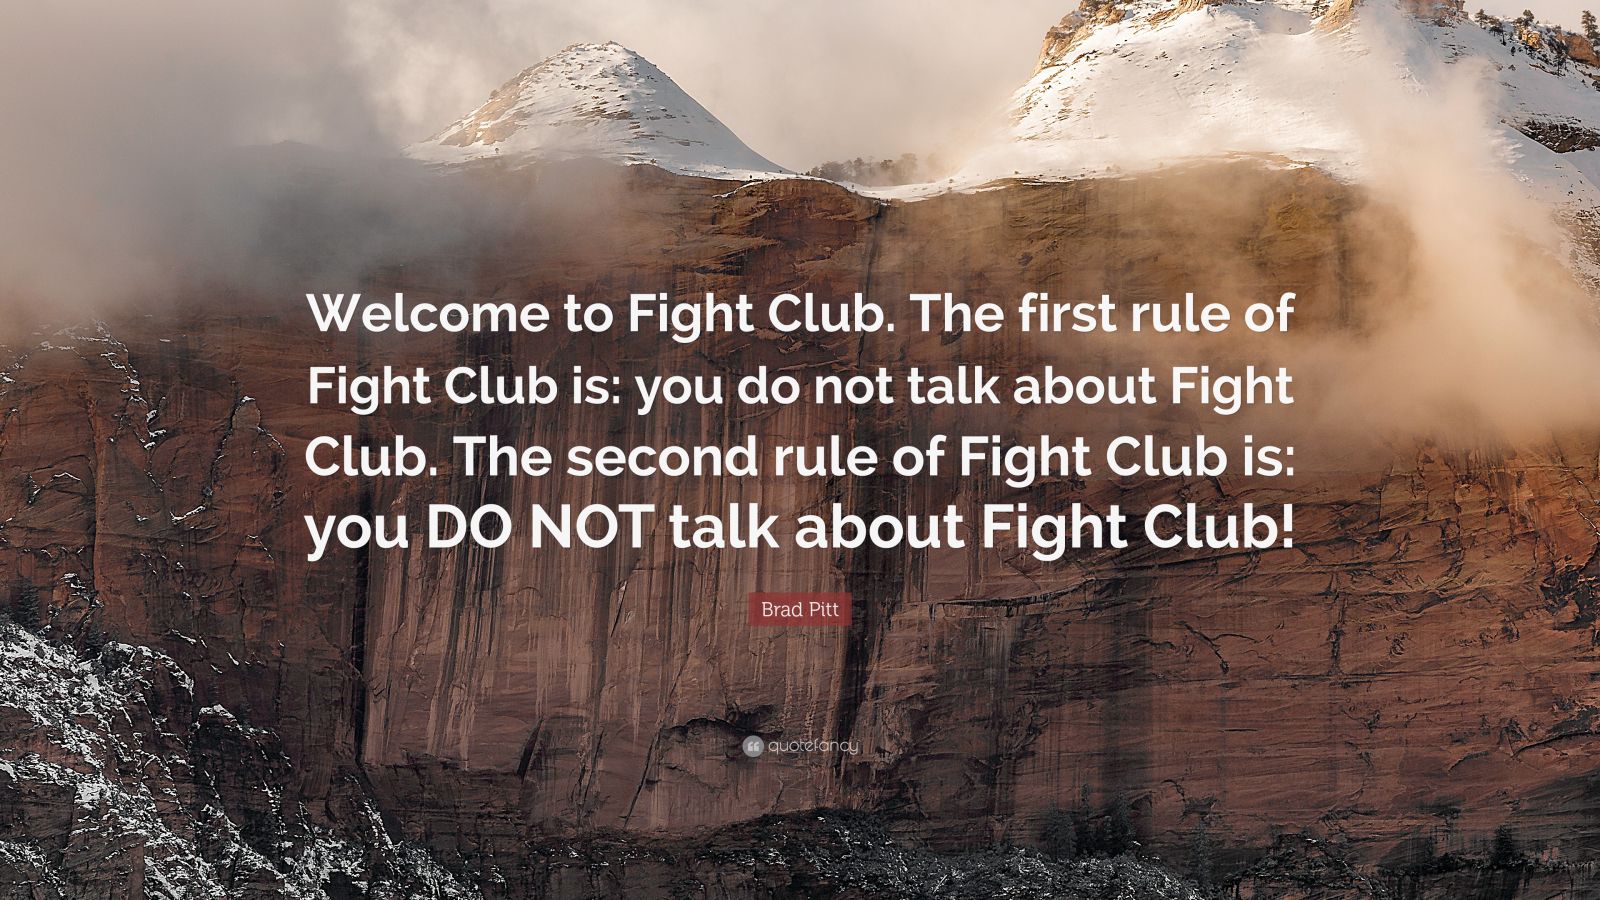 Brad Pitt Quote: “Welcome to Fight Club. The first rule of Fight Club ...